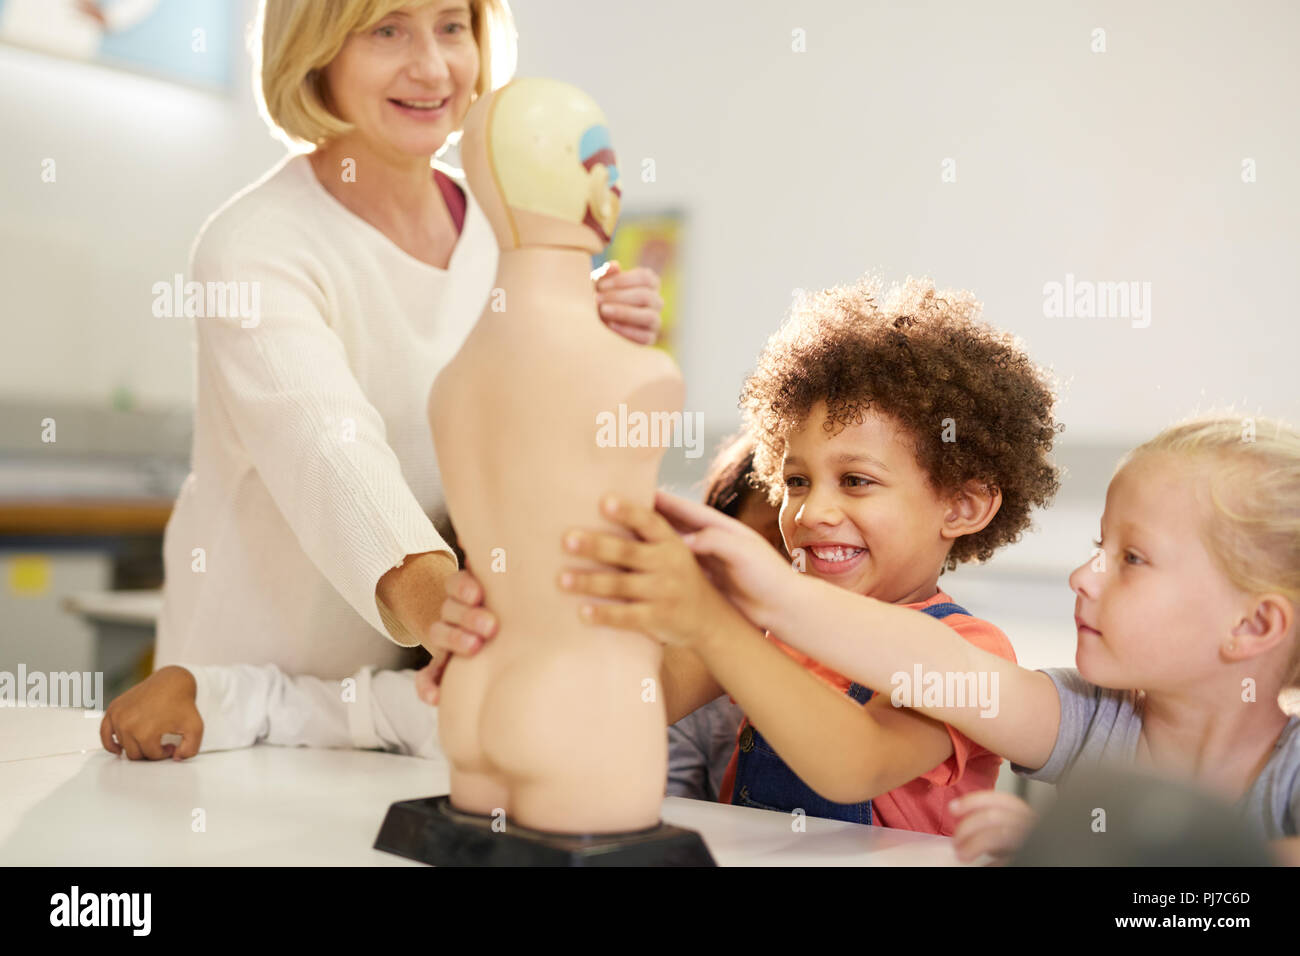 Teacher and curious students playing with anatomical model Stock Photo